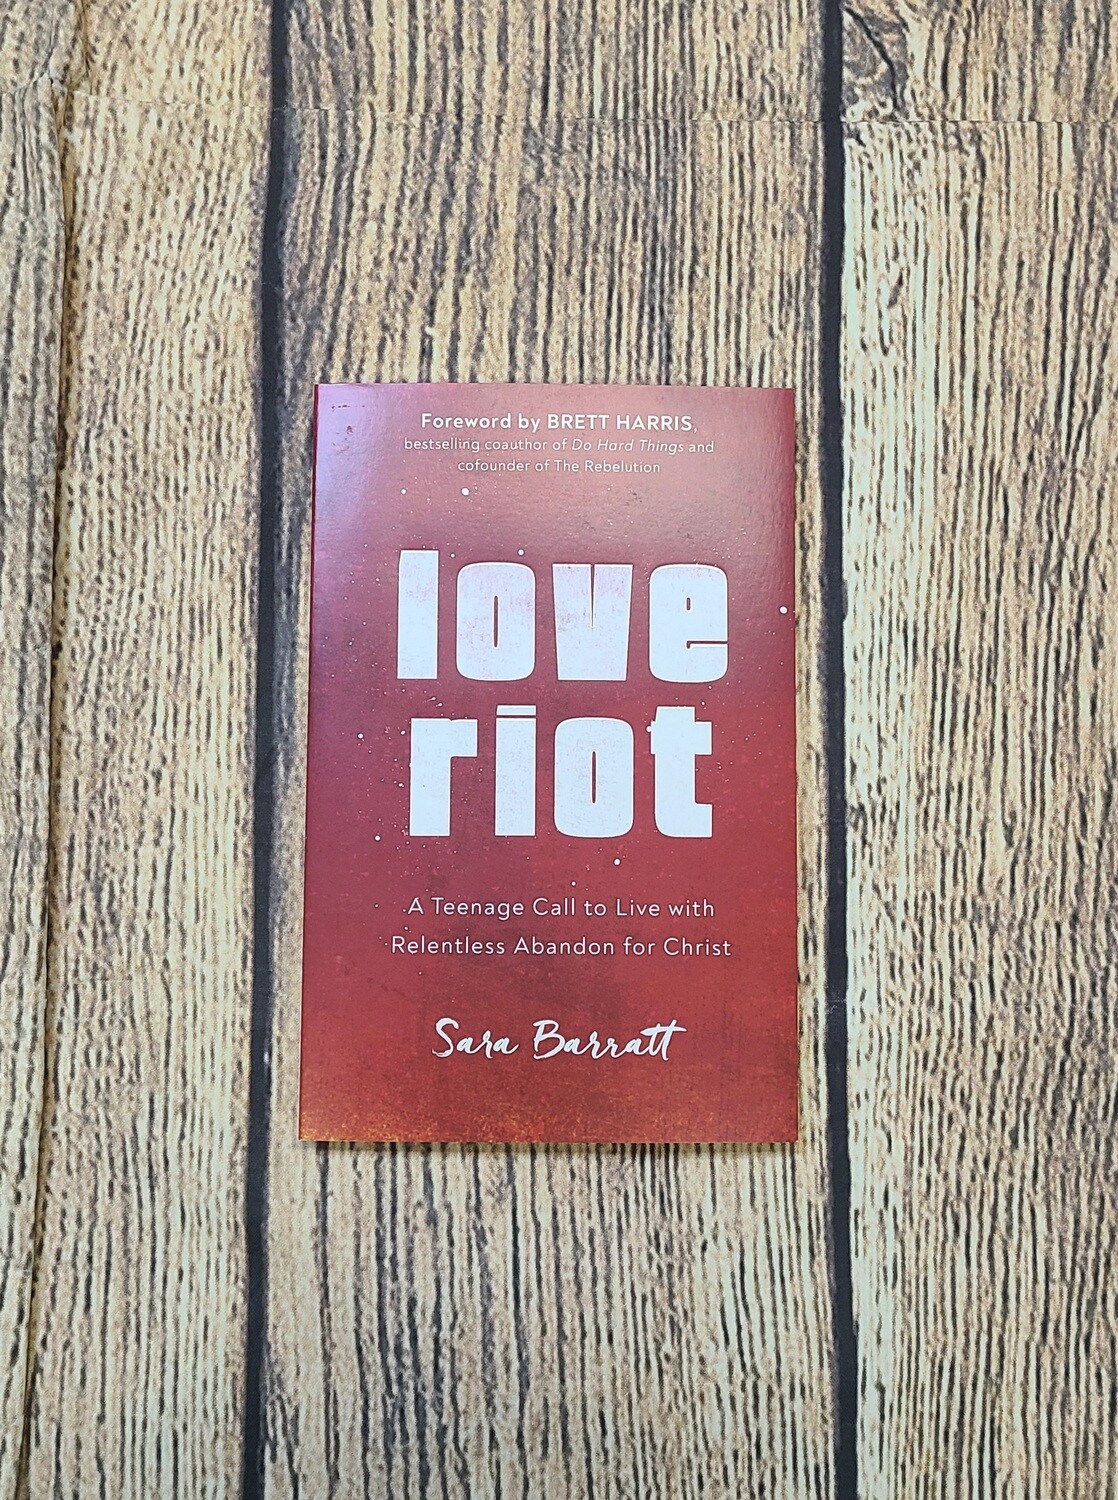 Love Riot: A Teenage Call to Live with Relentless Abandon for Christ by Sara Barratt and Foreword by Brett Harris - Paperback - New